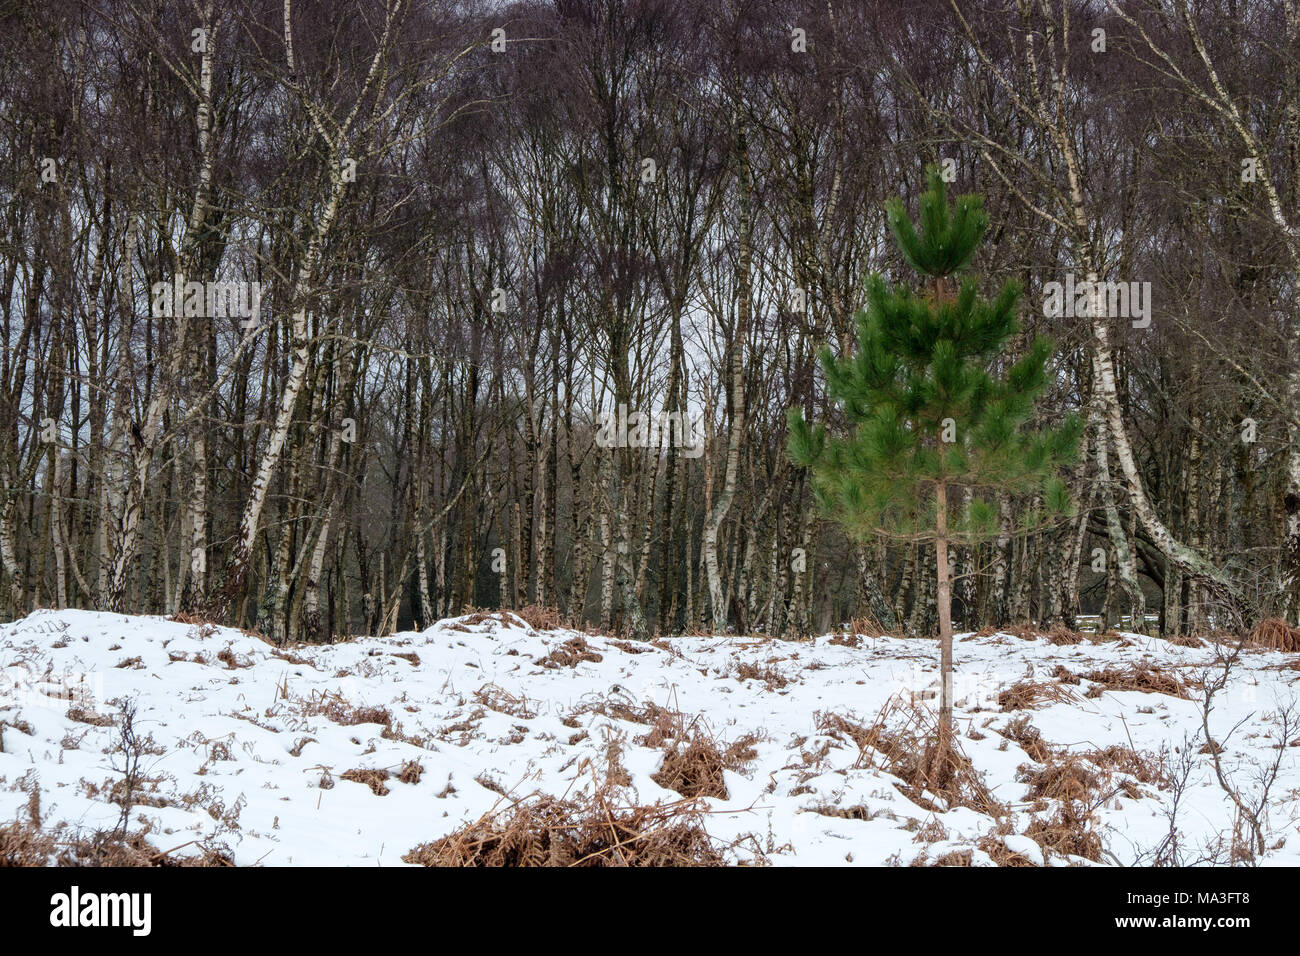 A Green Conifer growing among Silver Birch at Denny Woods The New Forest Stock Photo